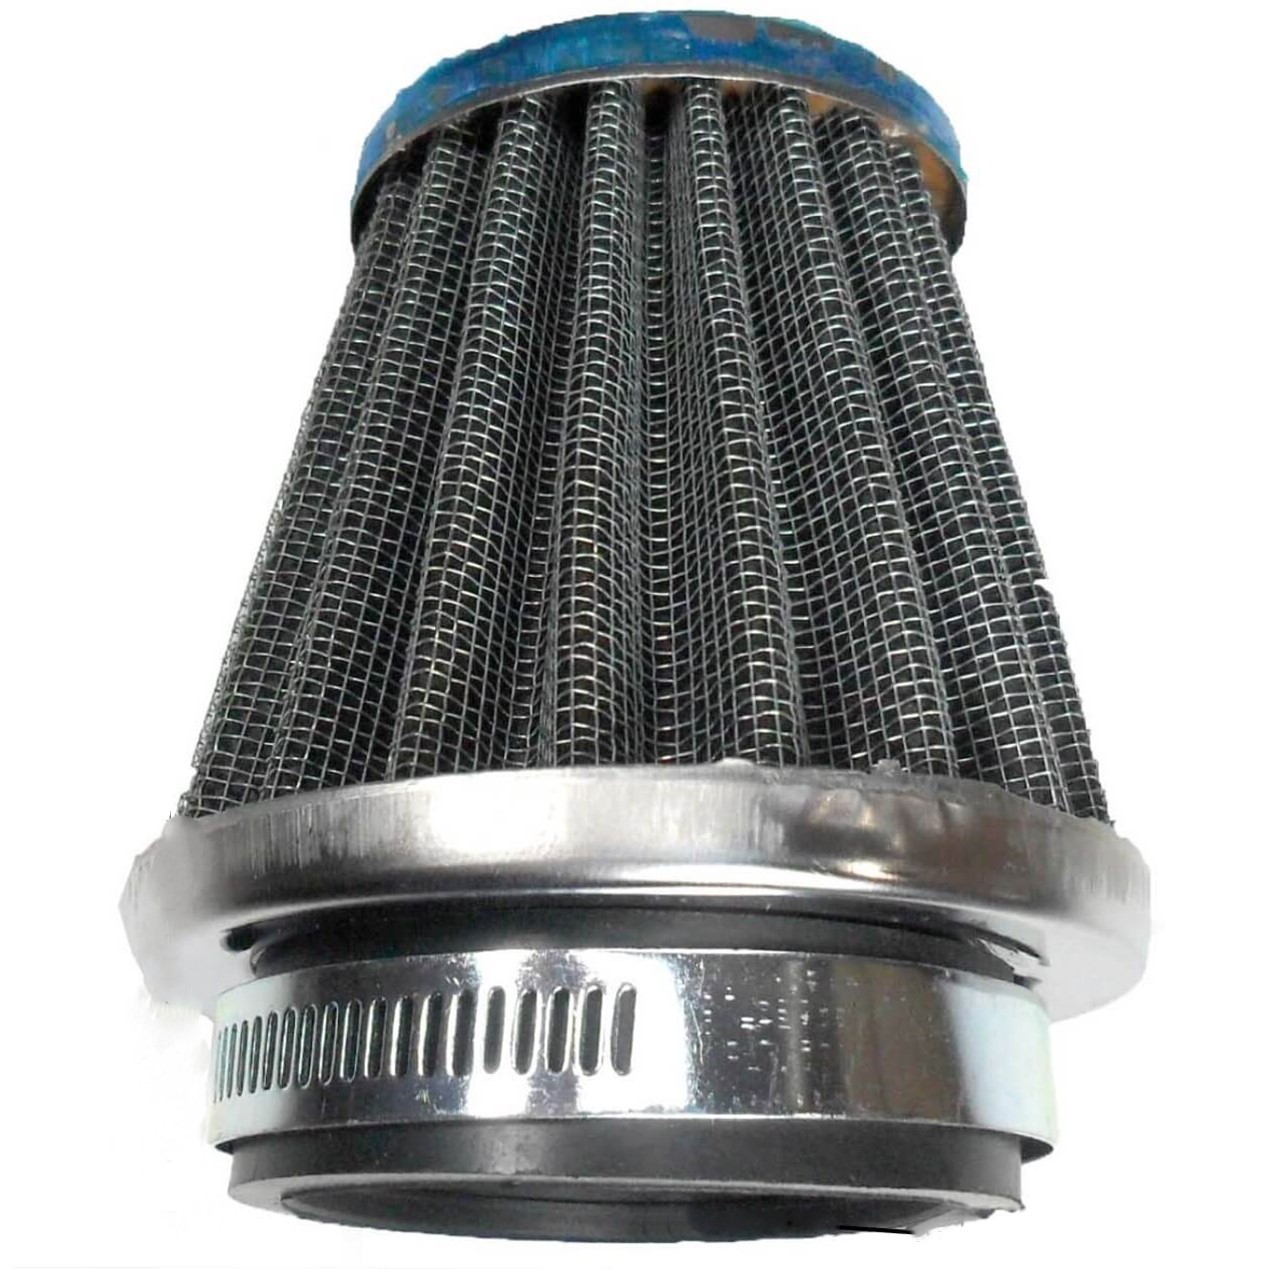 Air Filter ID=48mm, Total L=89mm - Click Image to Close